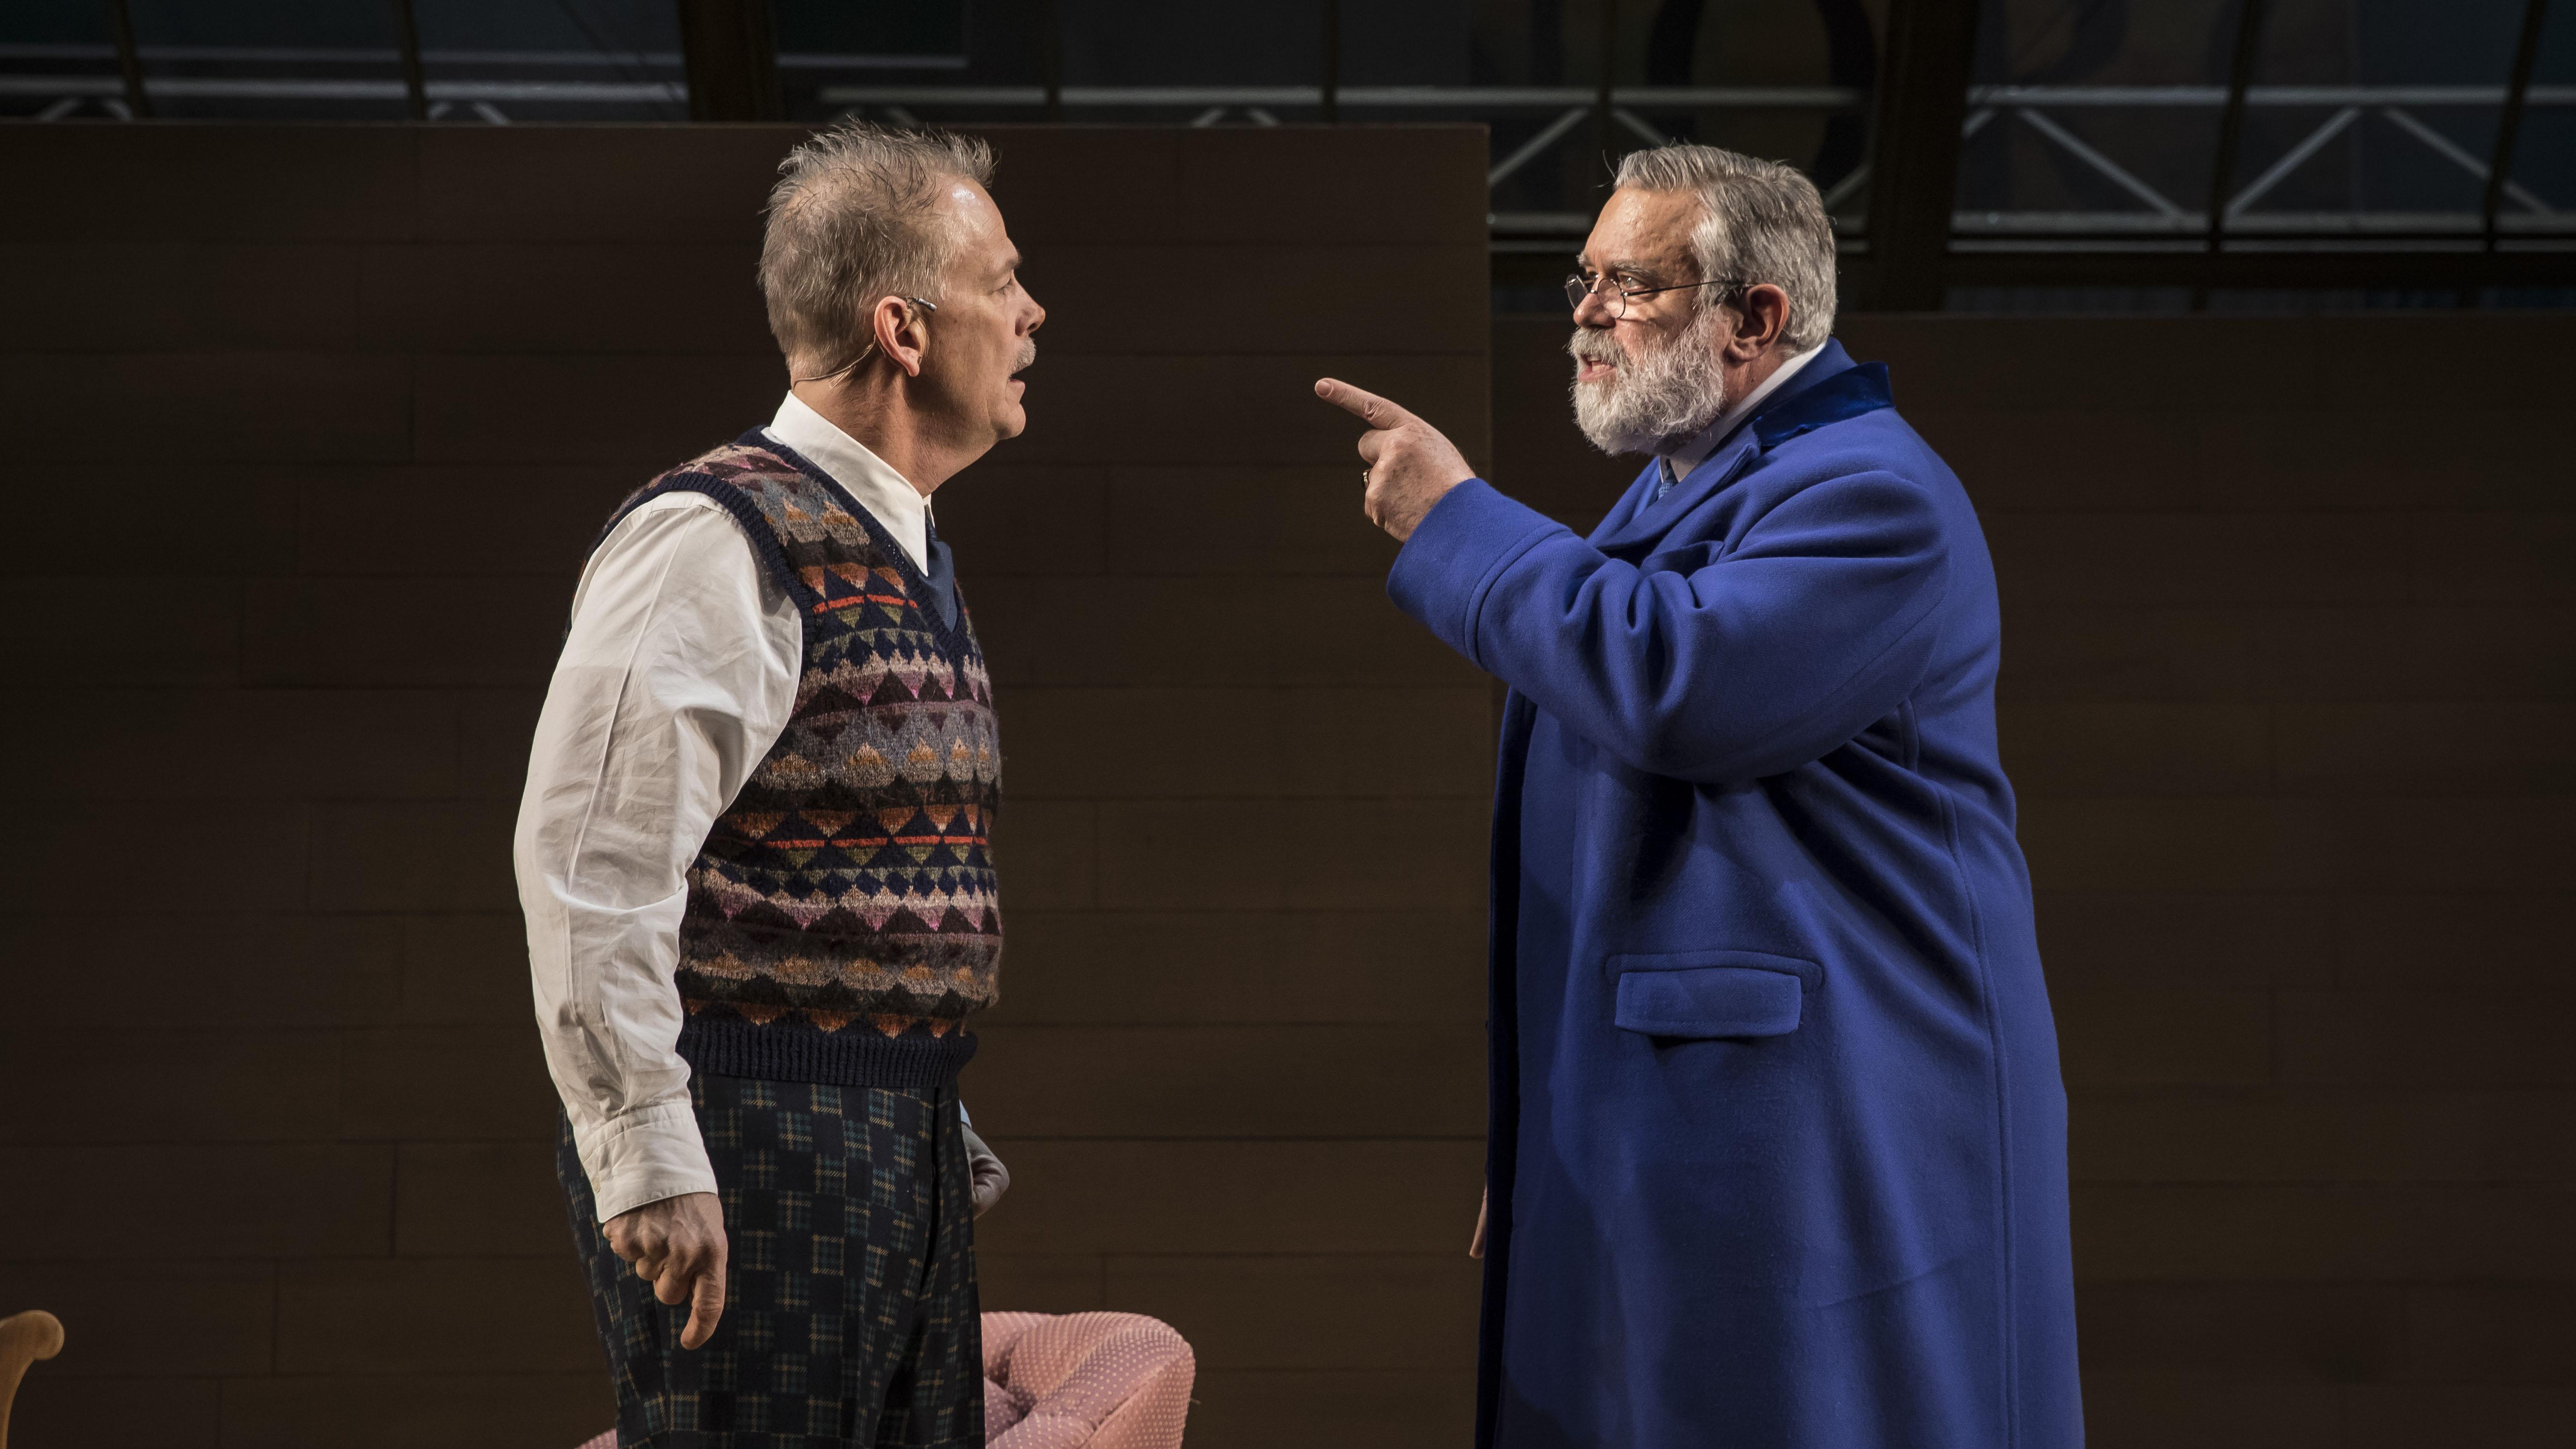 Philip Earl Johnson (Thomas Stockmann) and Scott Jaeck (Peter Stockmann) in “An Enemy of the People” by Henrik Ibsen, adapted and directed by Robert Falls at Goodman Theatre. (Credit: Liz Lauren)